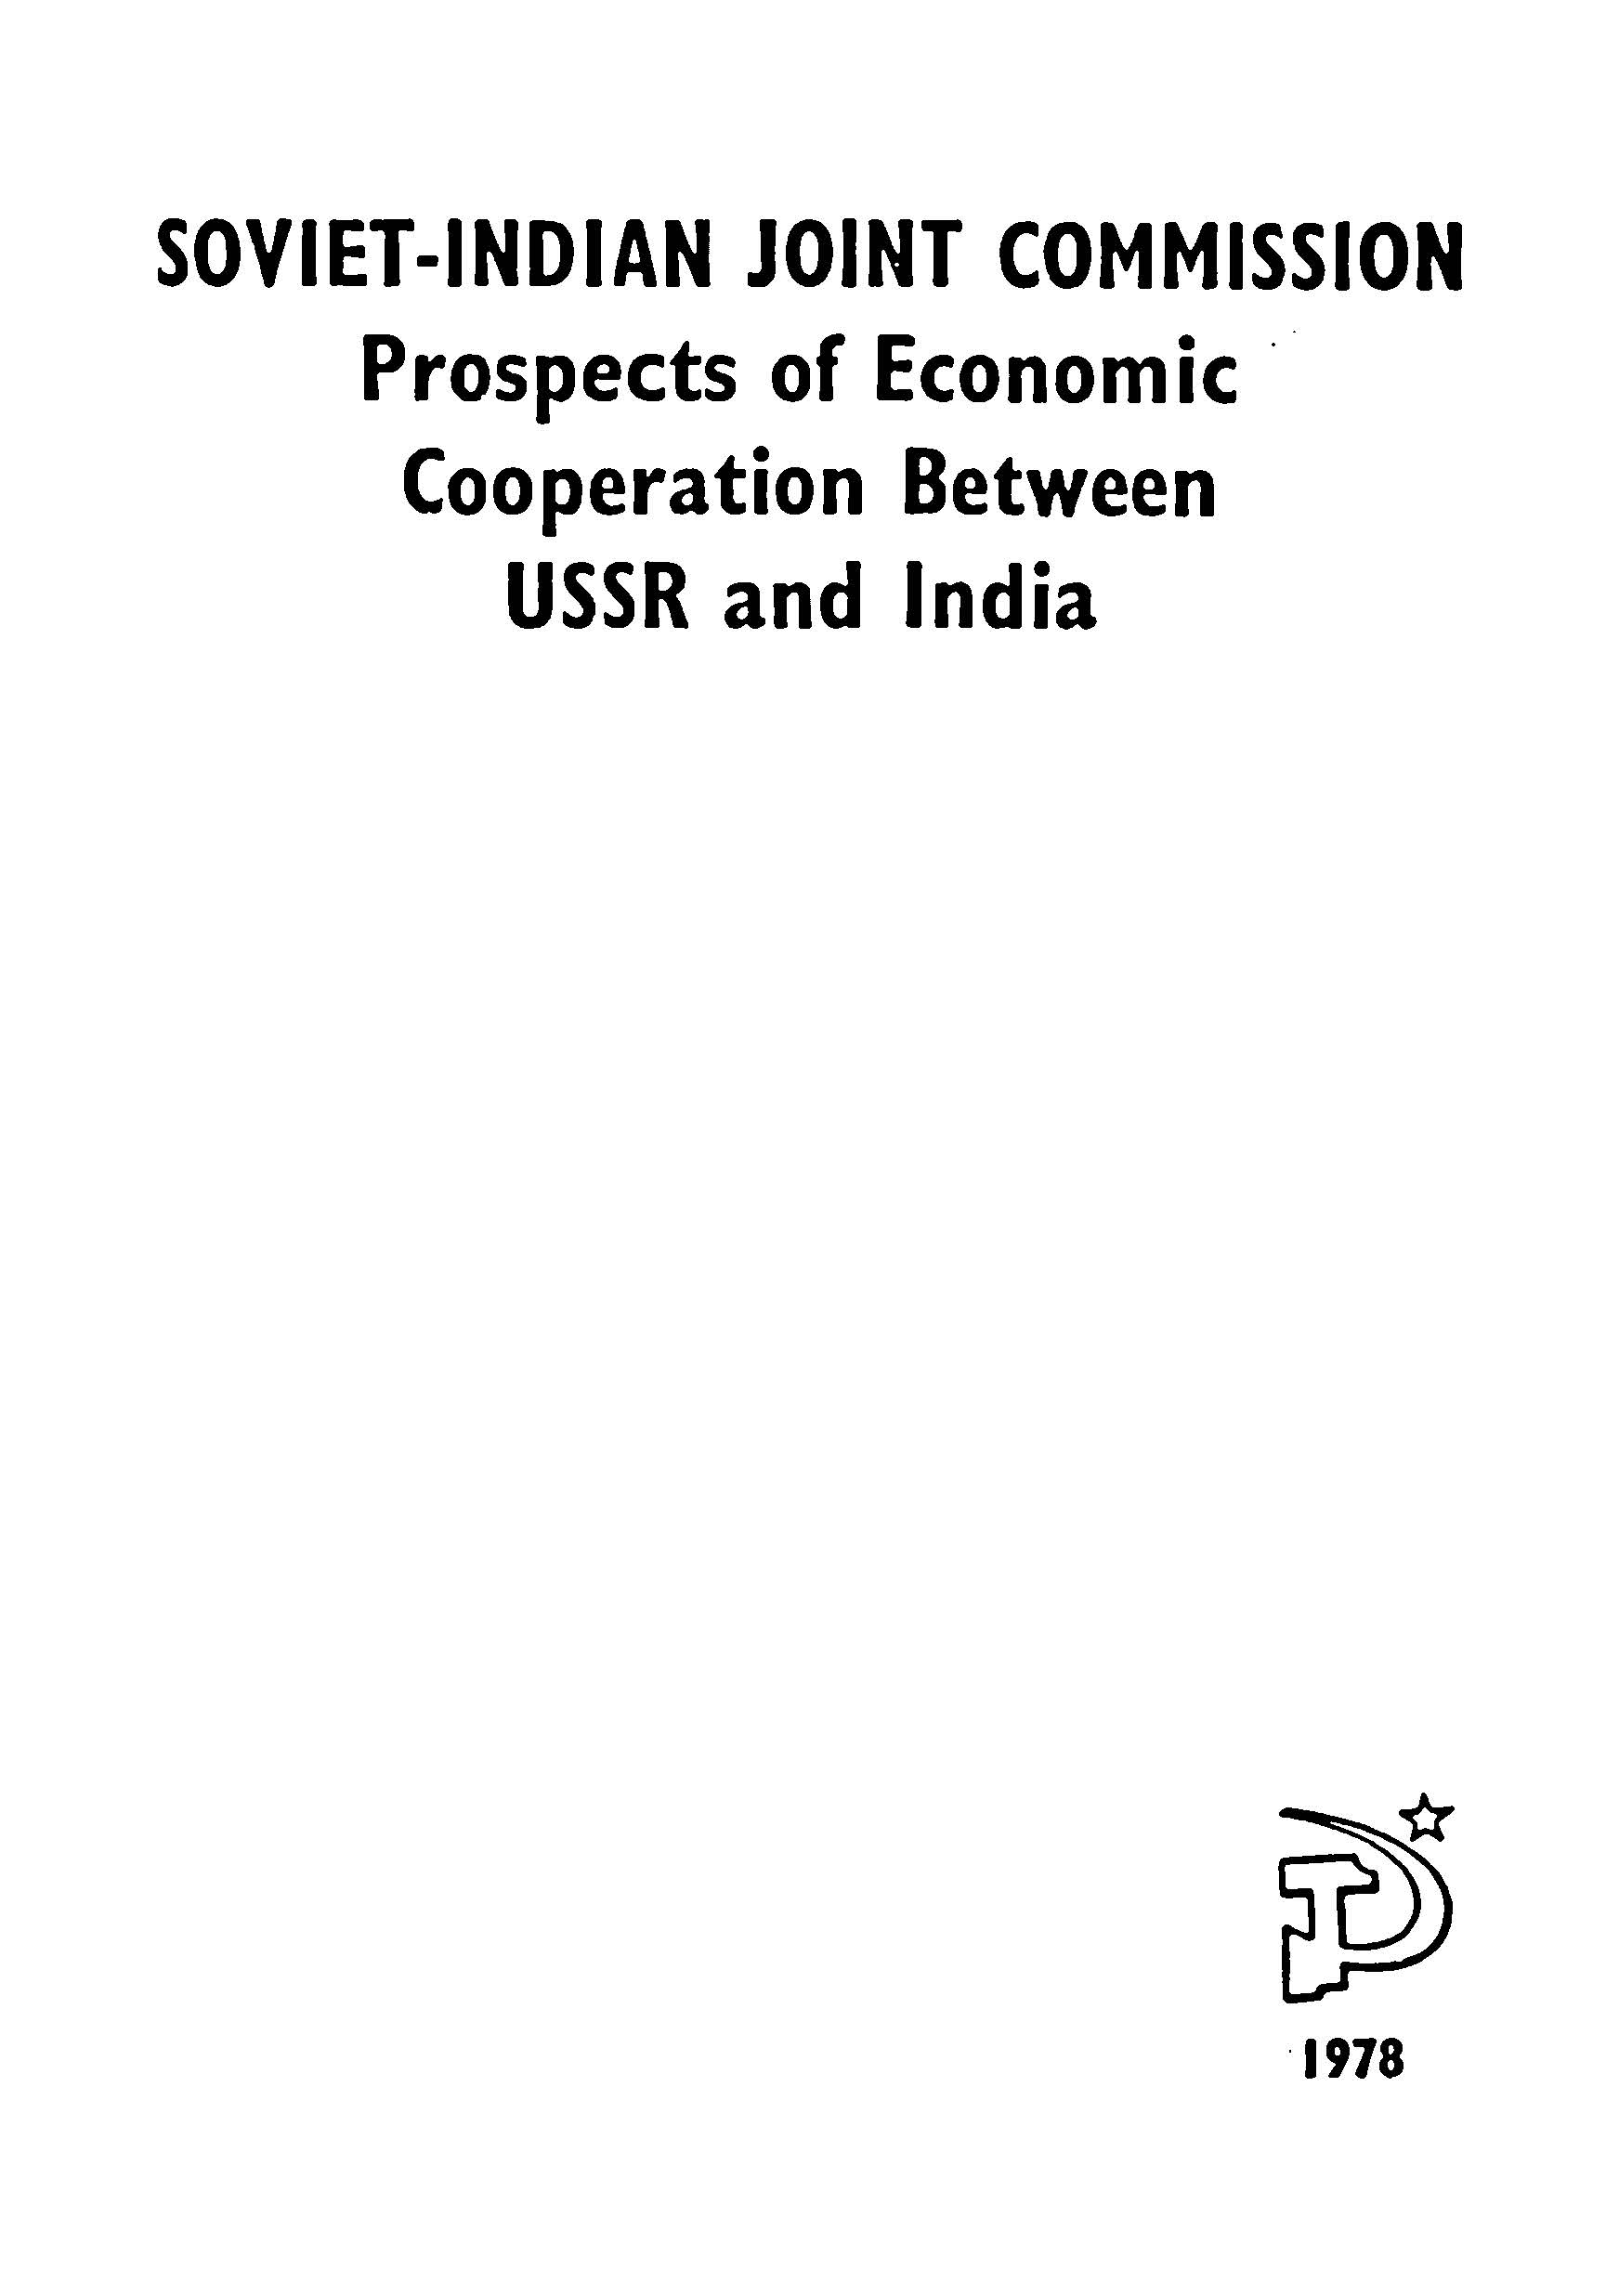 Soviet-indian joint commission prospects of economic cooperation bet ween USSR and india